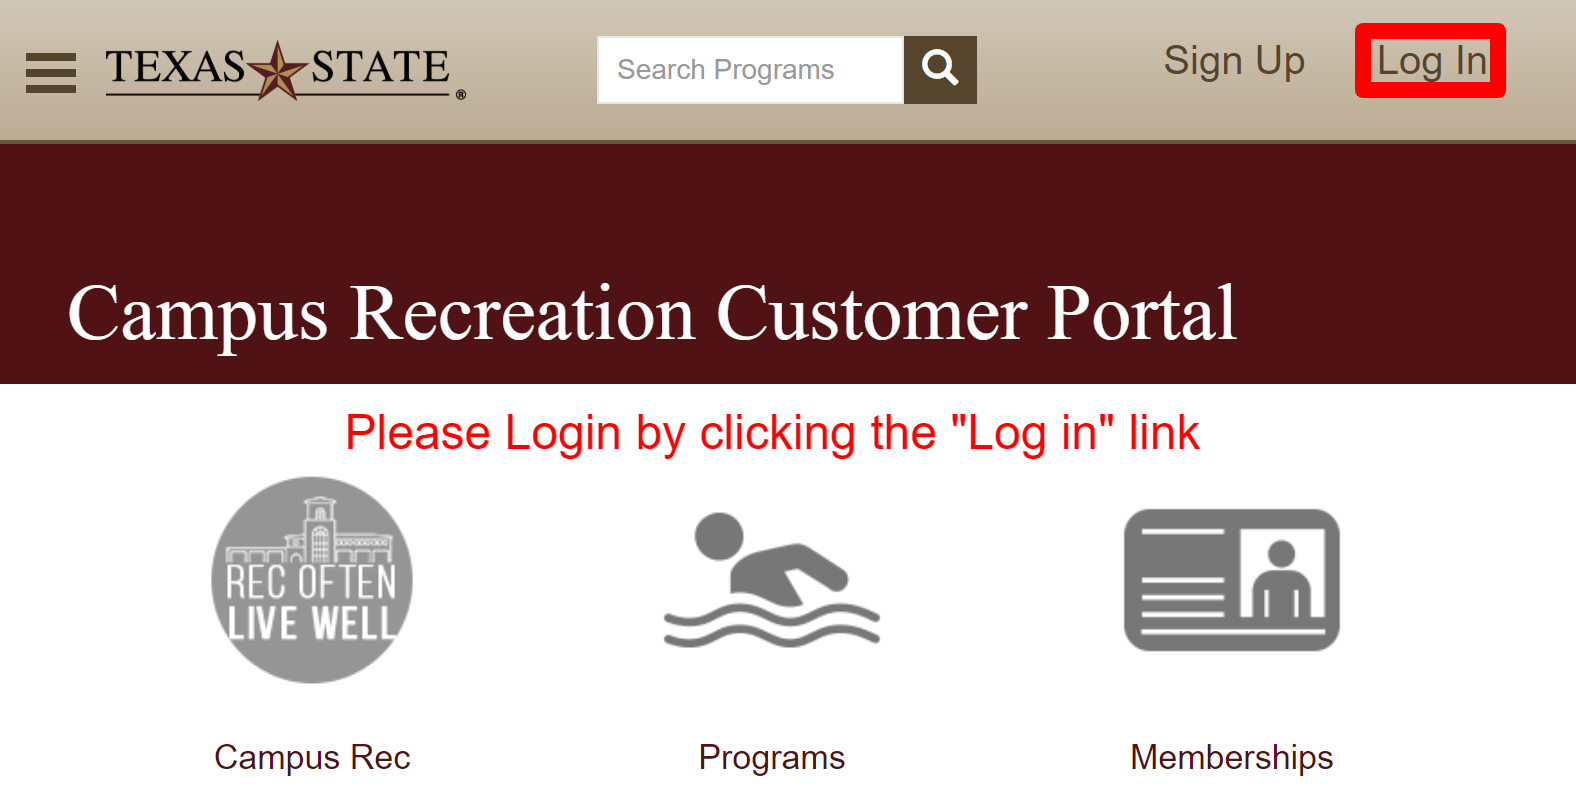 First step to create a request is to login